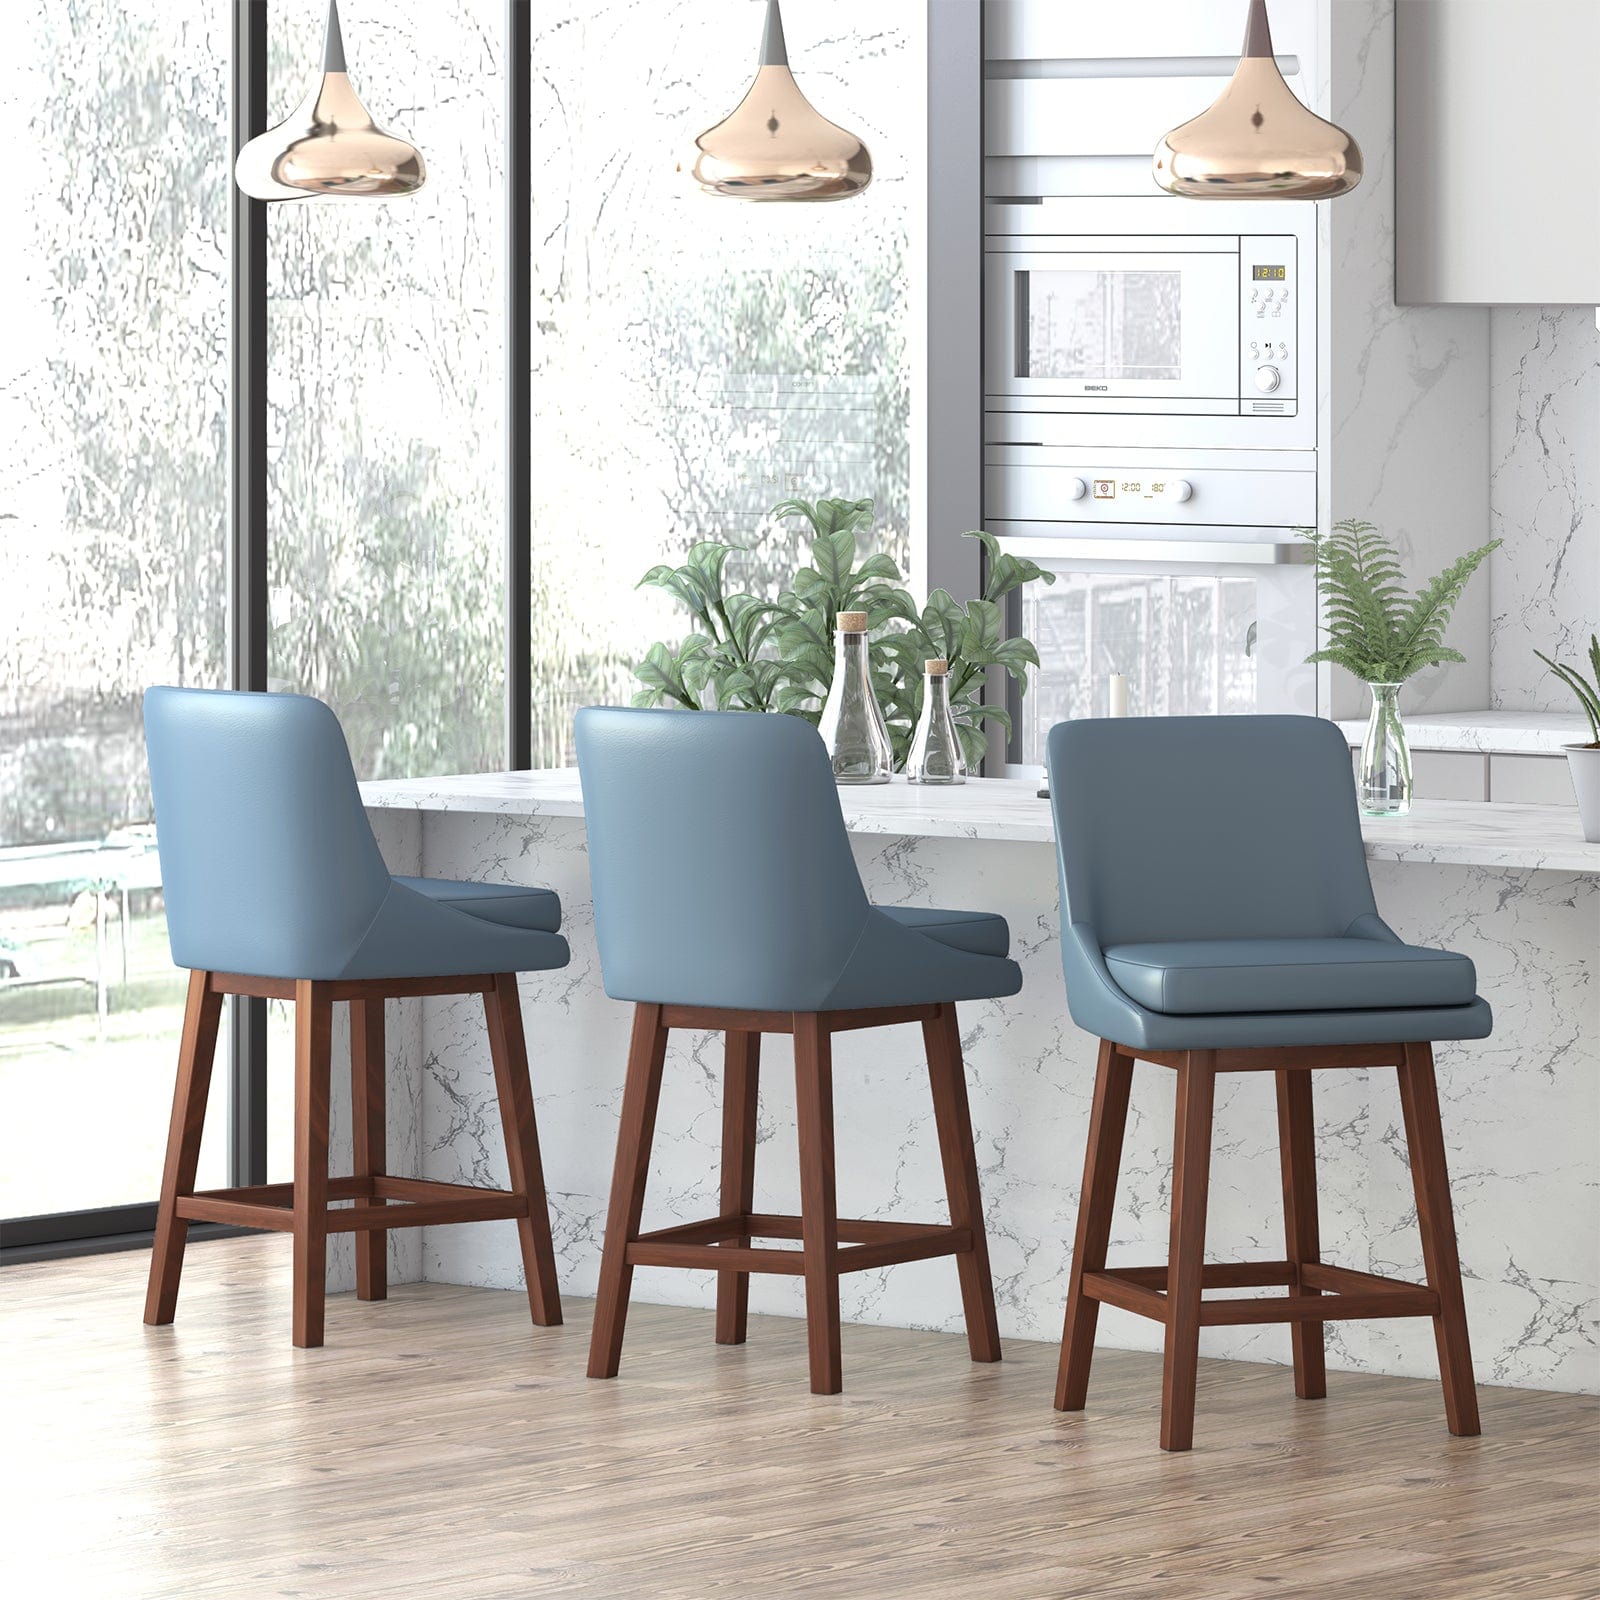 Barstool | Faux Leathe 360° Free Swivel Thicken Sponge Cushion Barstool Chair With Back And Footrest - uenjoychair